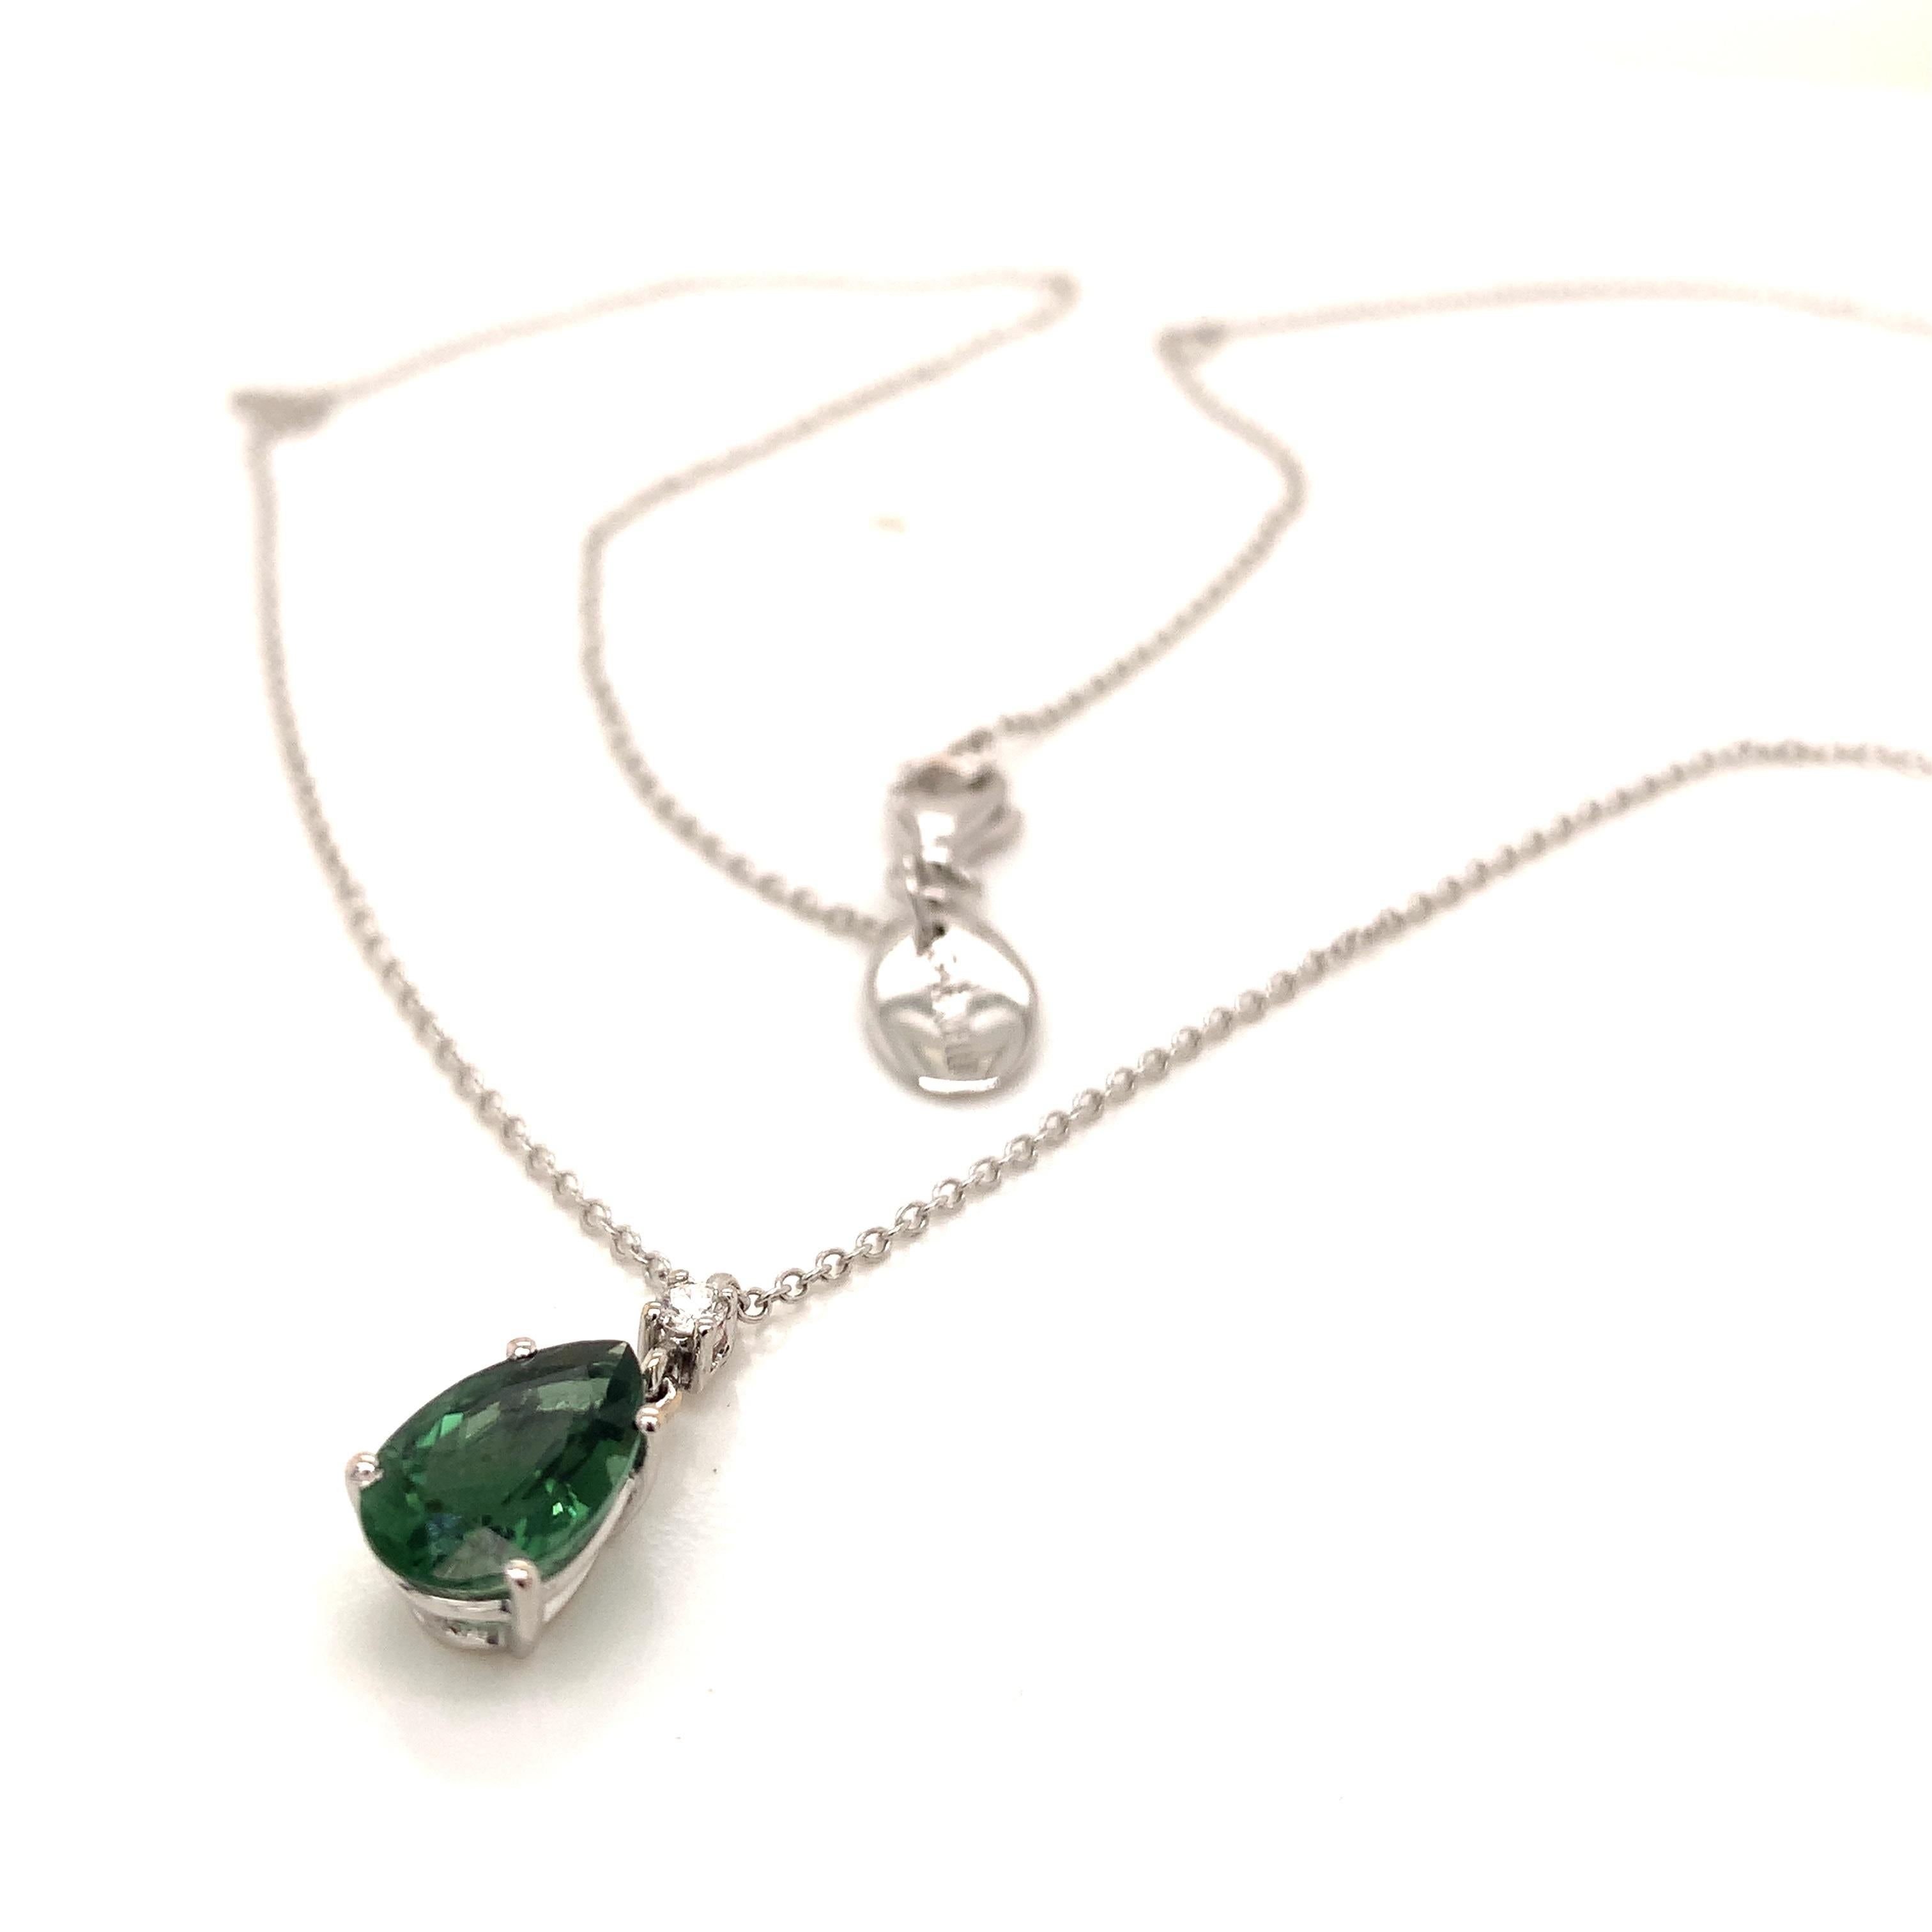 Garavelli pendant with chain in drop design, in white gold 18 kt with green tourmaline and white diamond, the perfect gift.
 The total chain lenght is 44 cm / inches 17  with a loop at 40 cm /15.5 inches
18kt GOLD grs : 2.85
green tourmaline ct 1.26